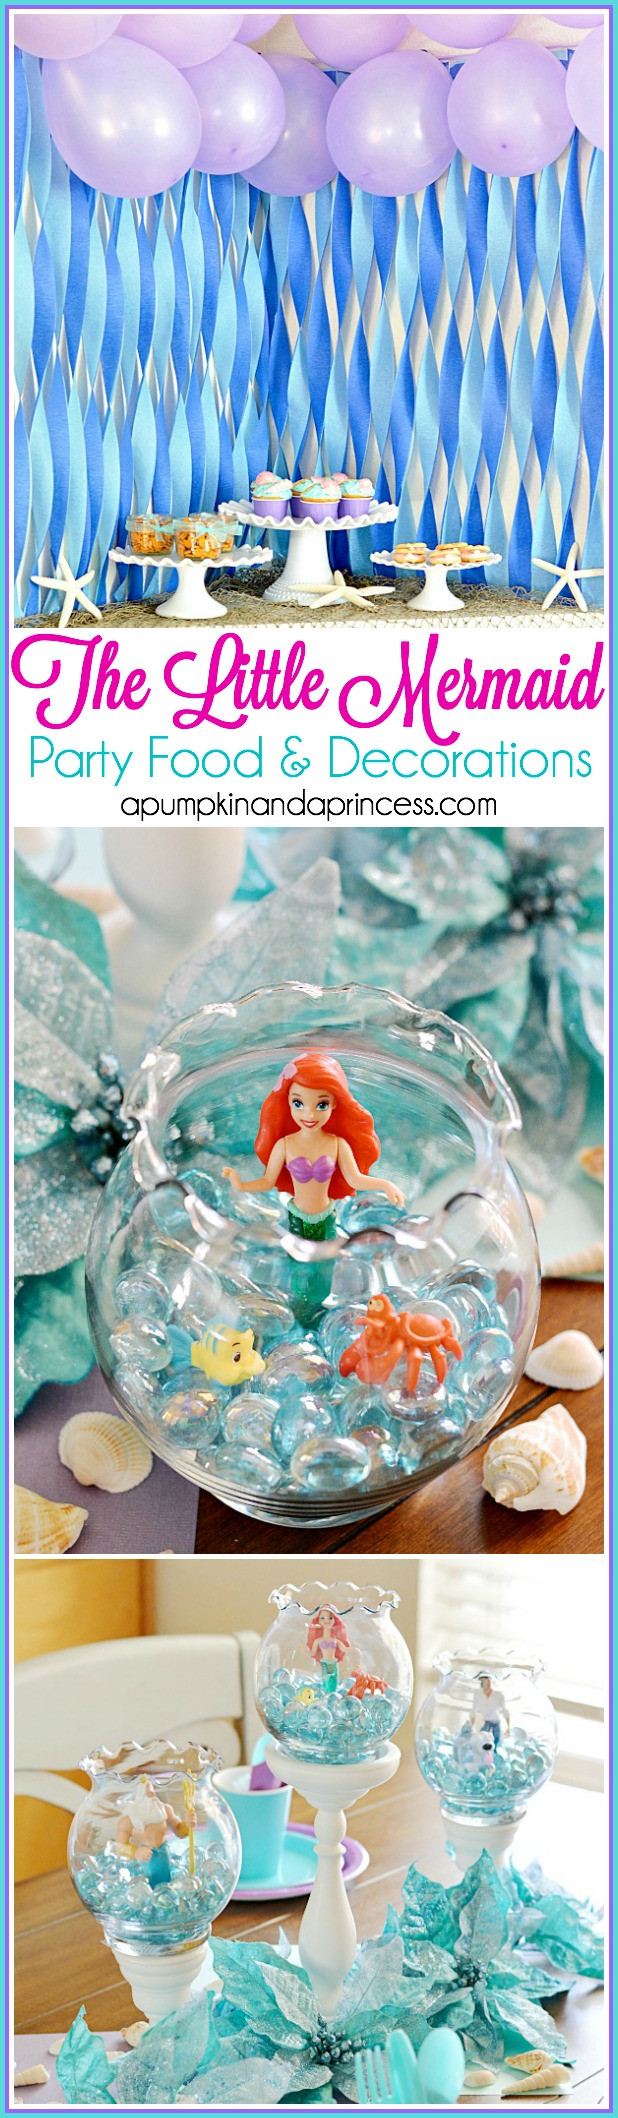 Little Mermaid Birthday Decorations
 The Little Mermaid Party A Pumpkin And A Princess